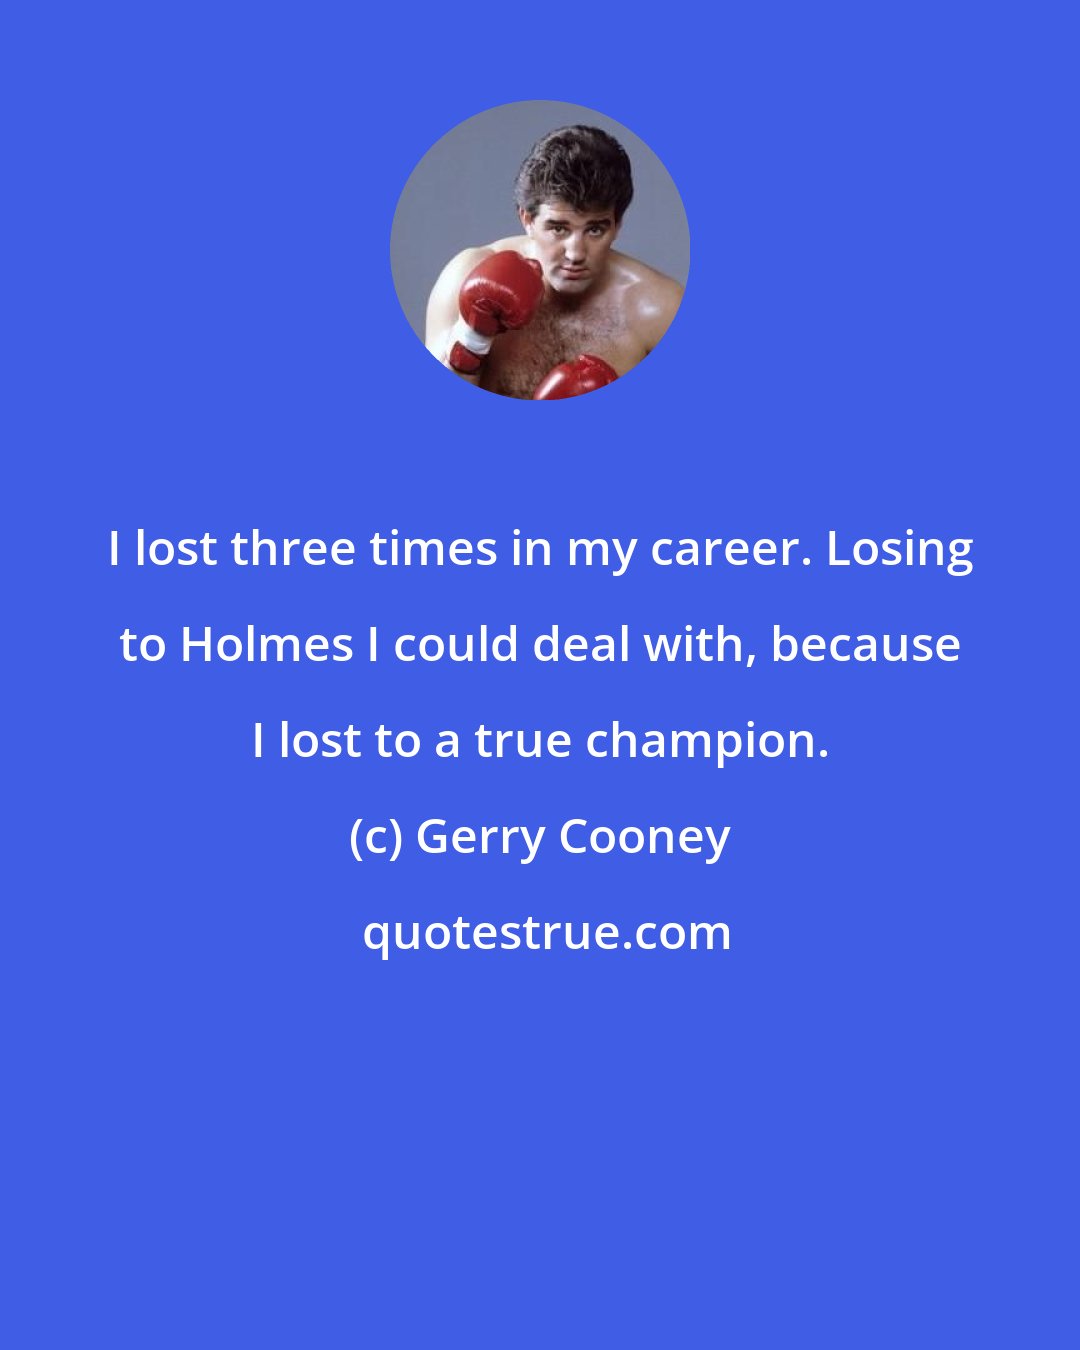 Gerry Cooney: I lost three times in my career. Losing to Holmes I could deal with, because I lost to a true champion.